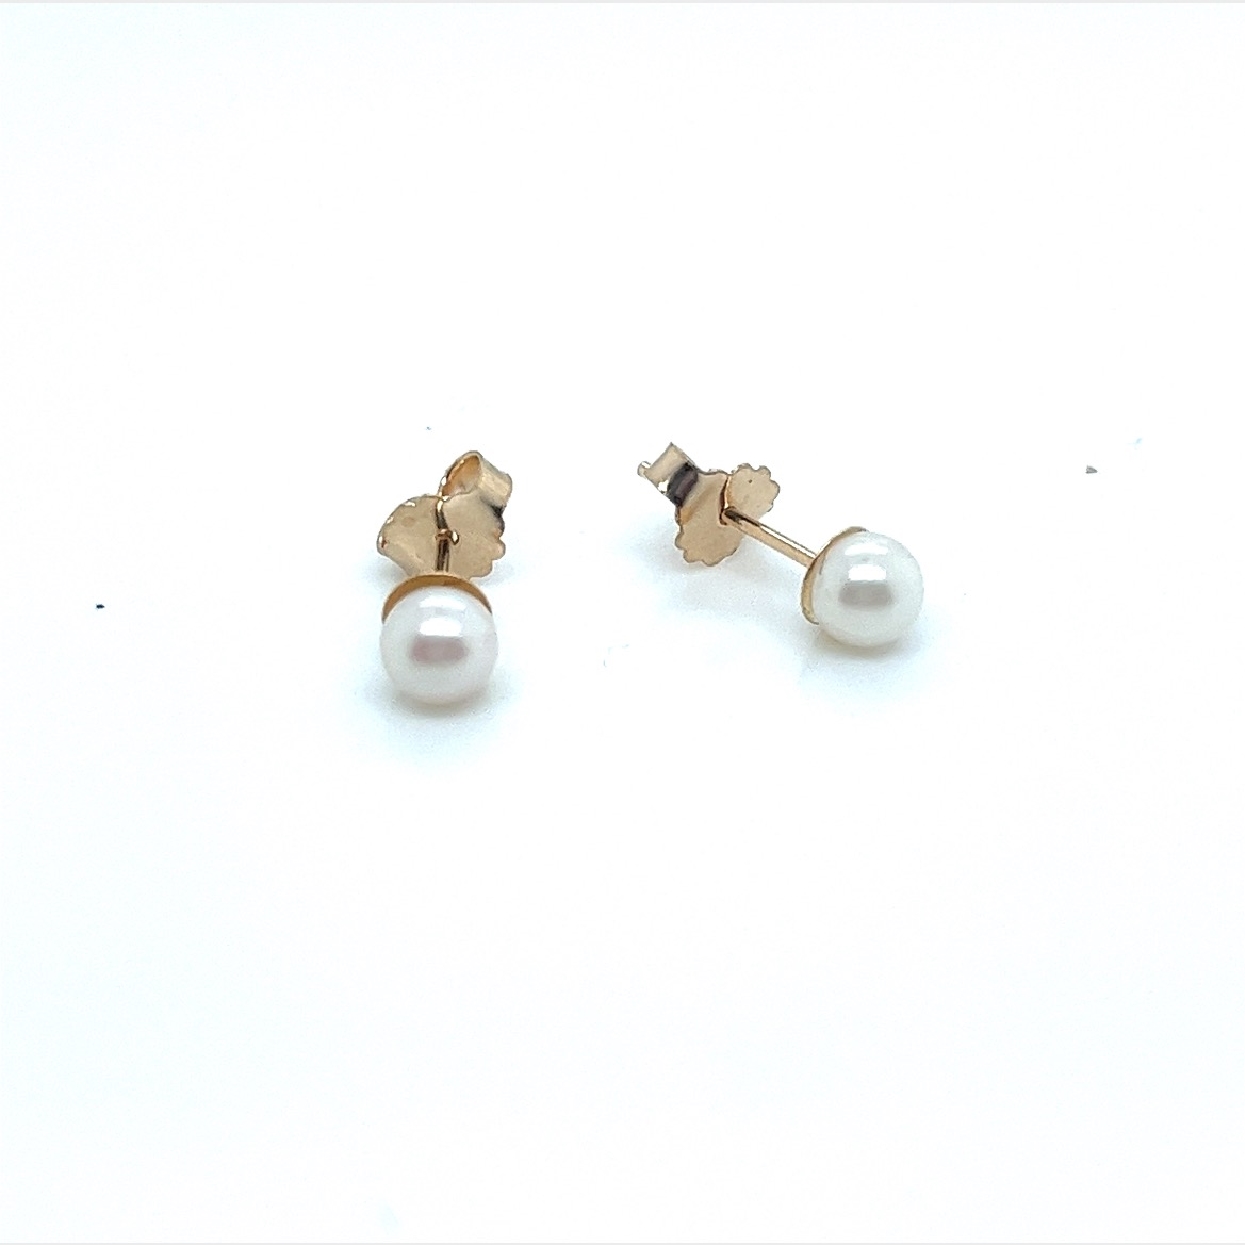 4mm Salt Water Pearl Studs on 14K Yellow Gold Posts with Friction Backs